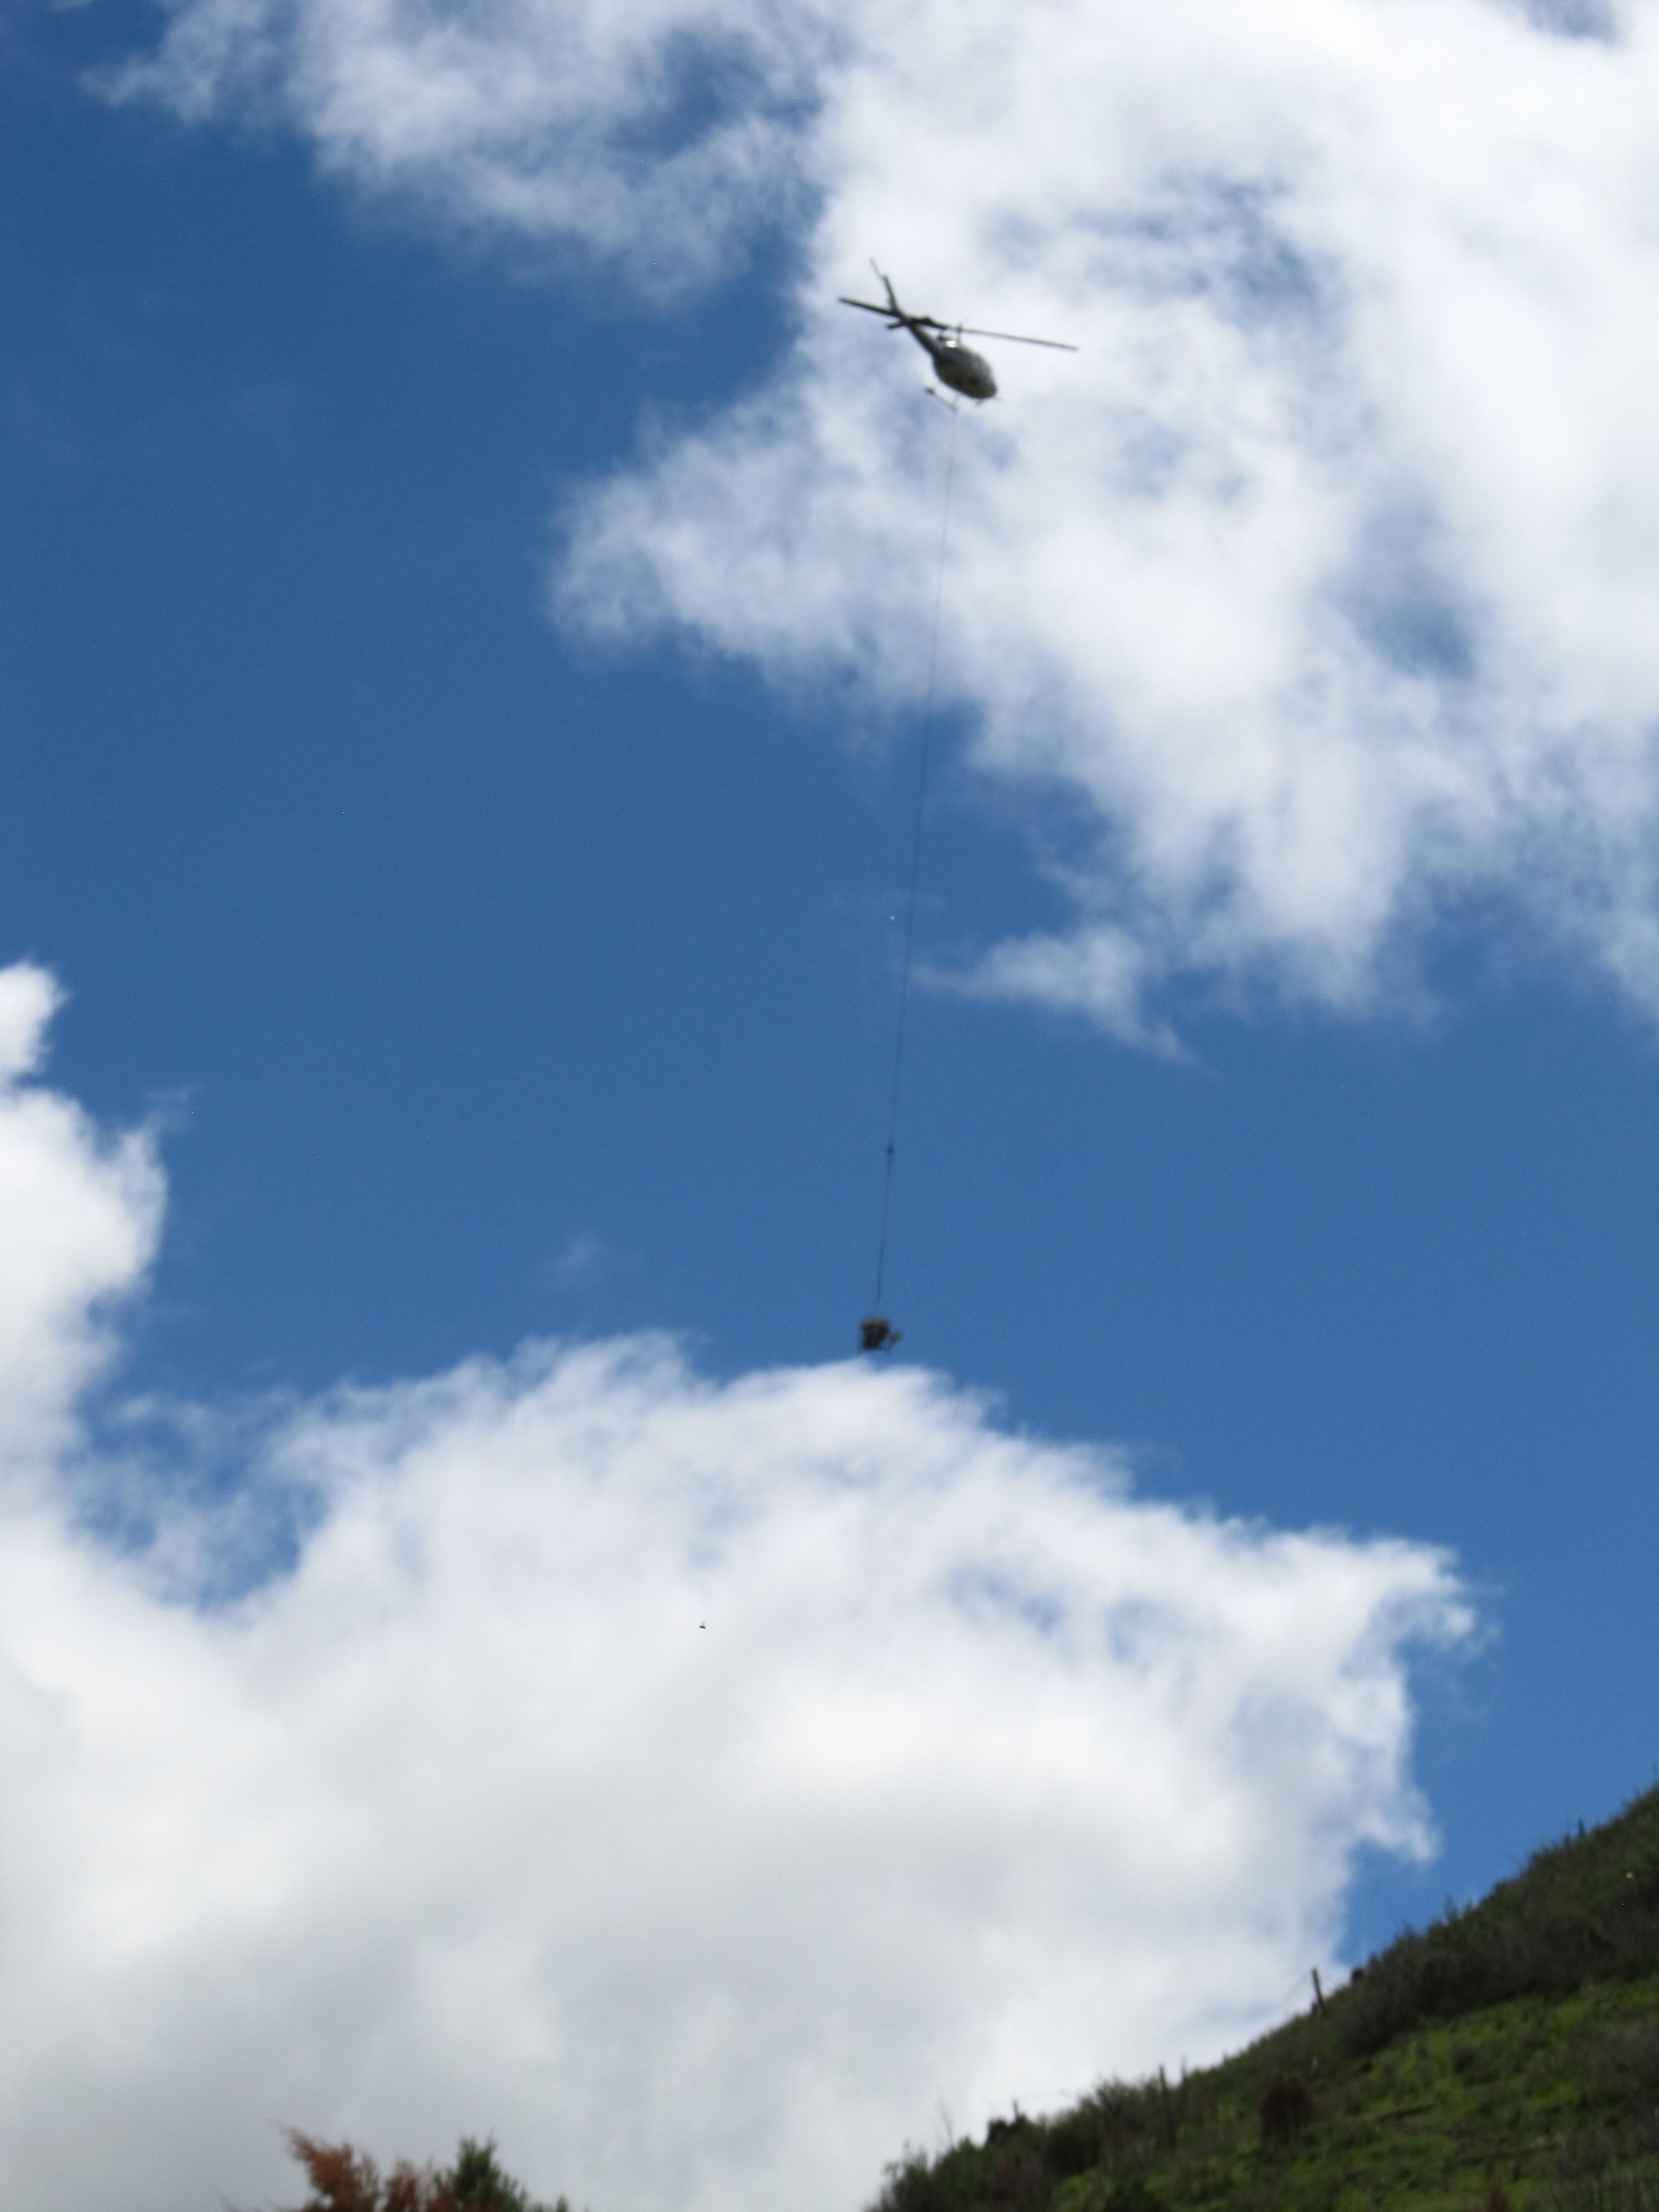 The seed hopper which is used to disperse the seeds, is suspended from the helicopter by a 100' long line